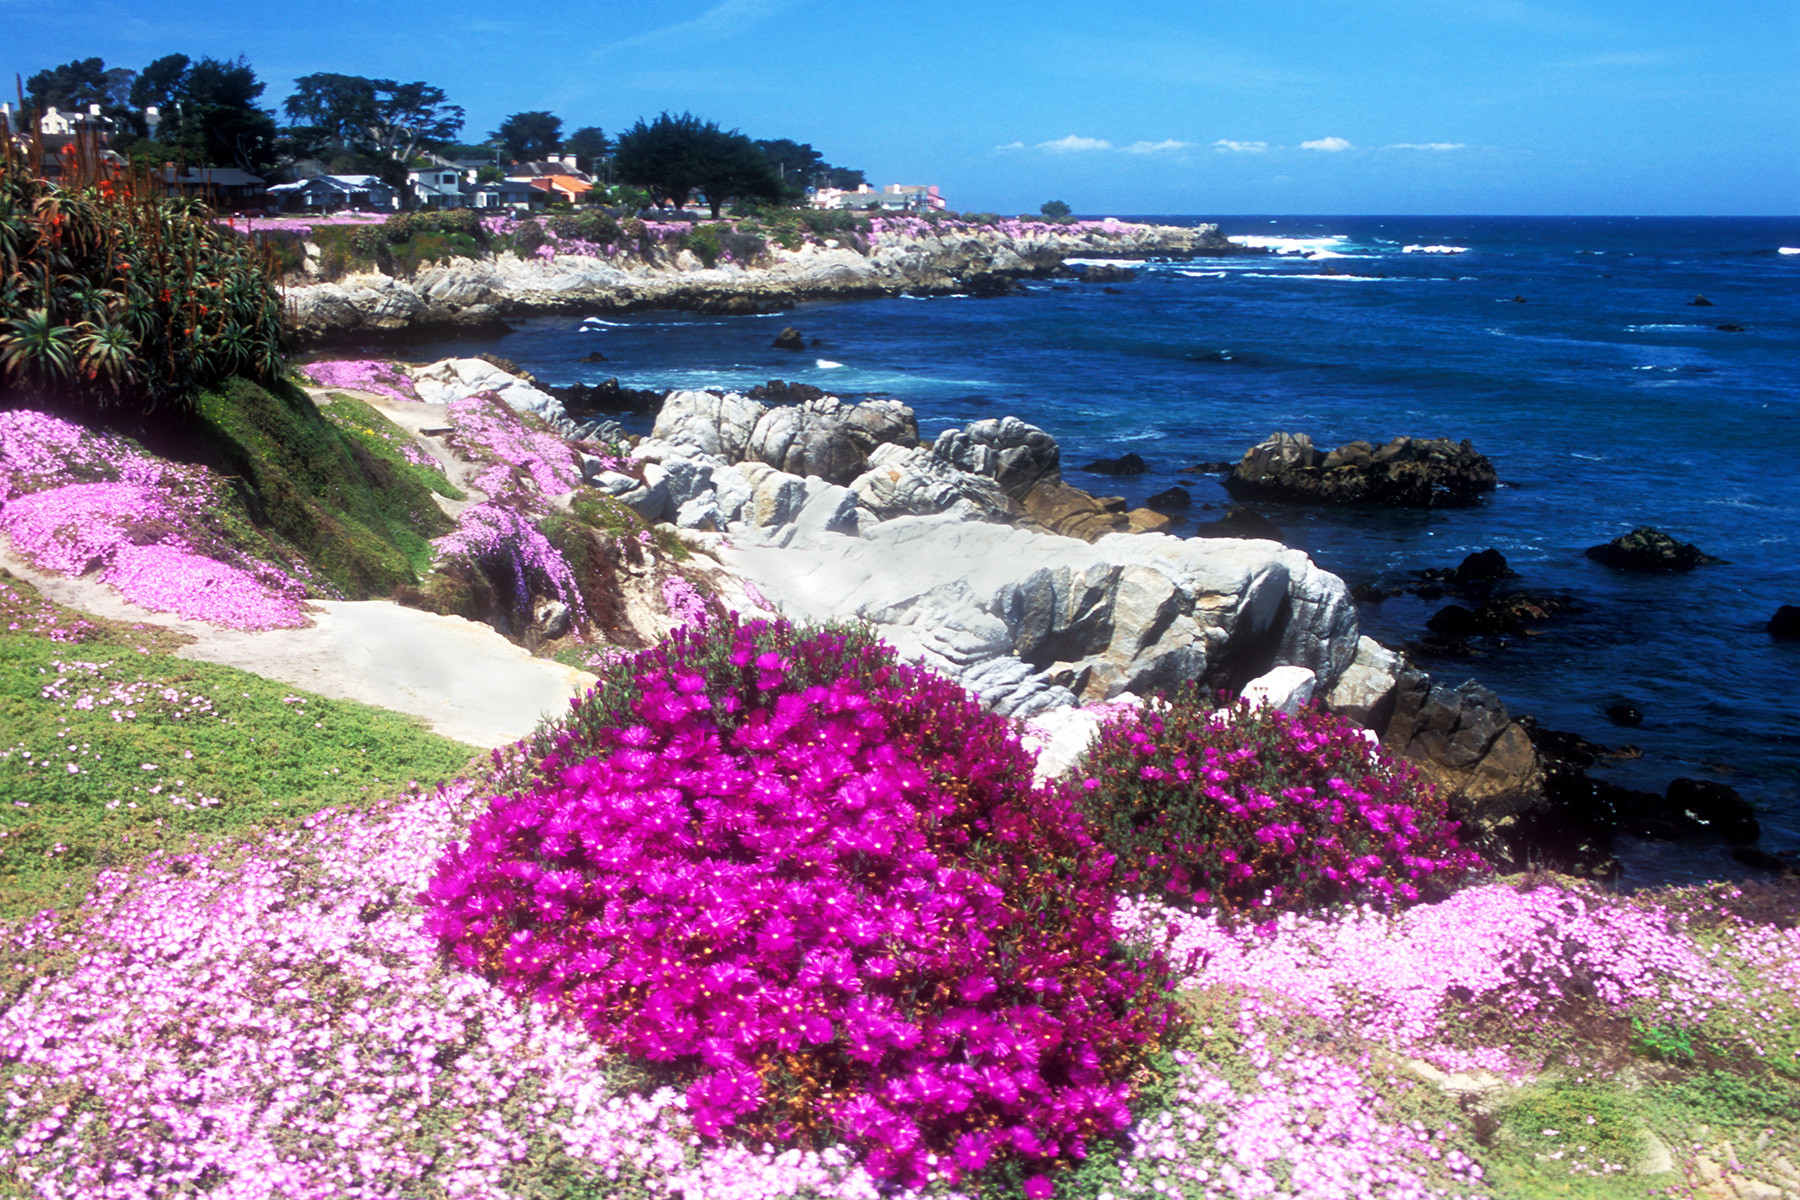 Lodging in Pacific Grove, CA